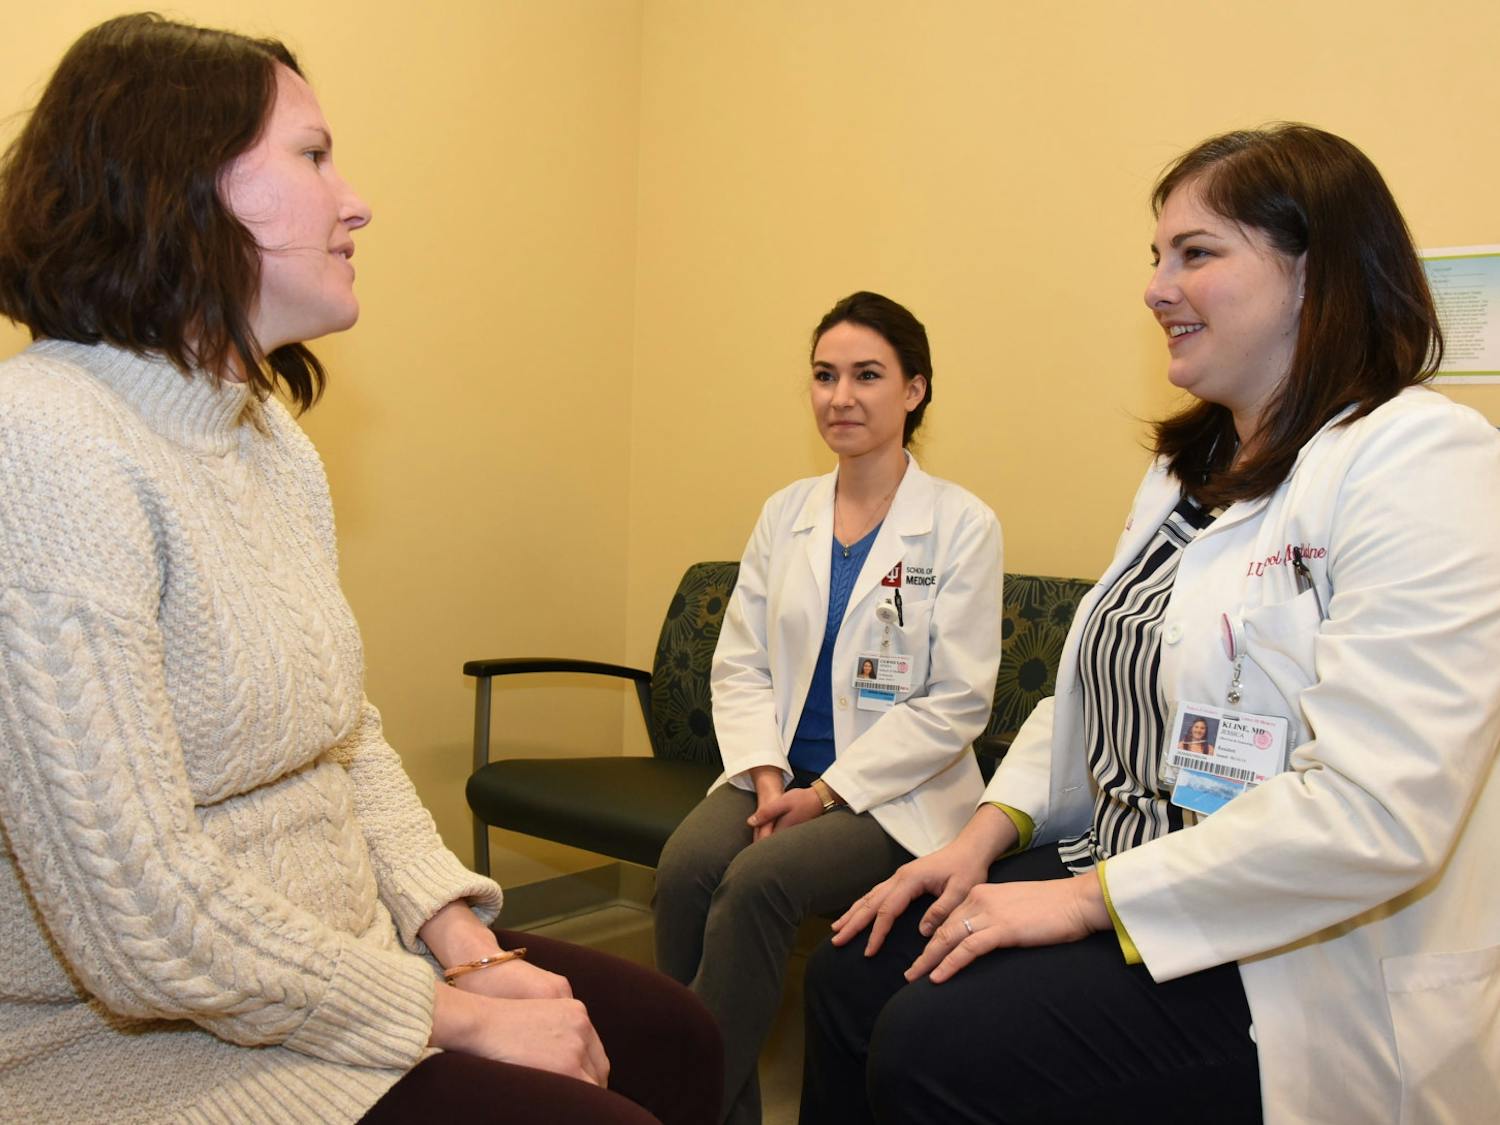 IUPUI students have access to a variety of healthcare services. Photo courtesy of IU Health.